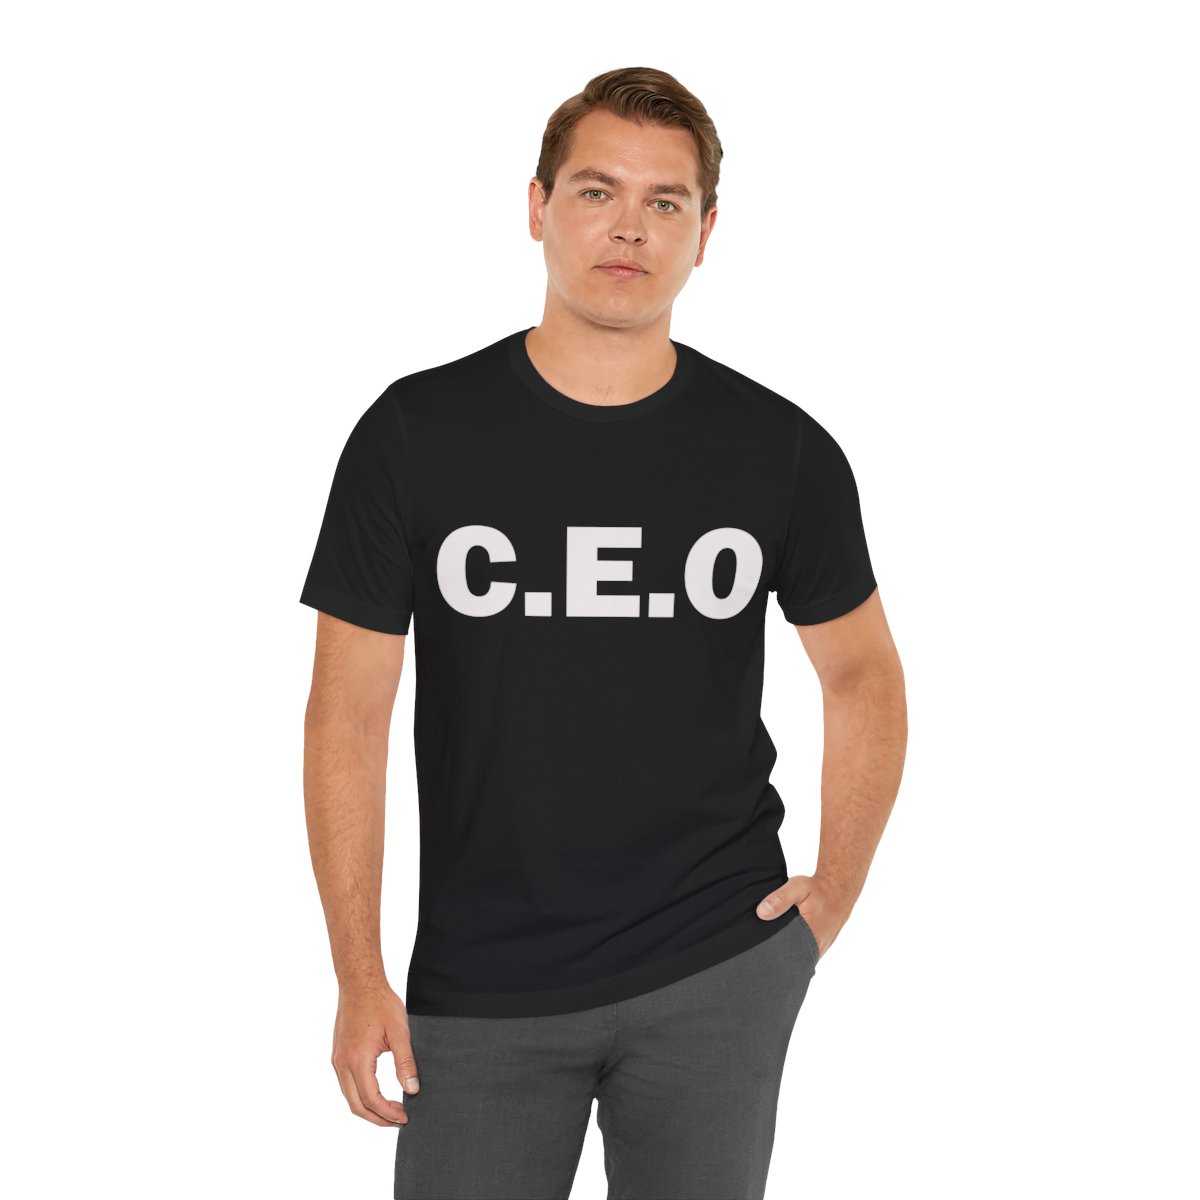 C.E.O. Inspiration Tee - Command Your Journey product thumbnail image